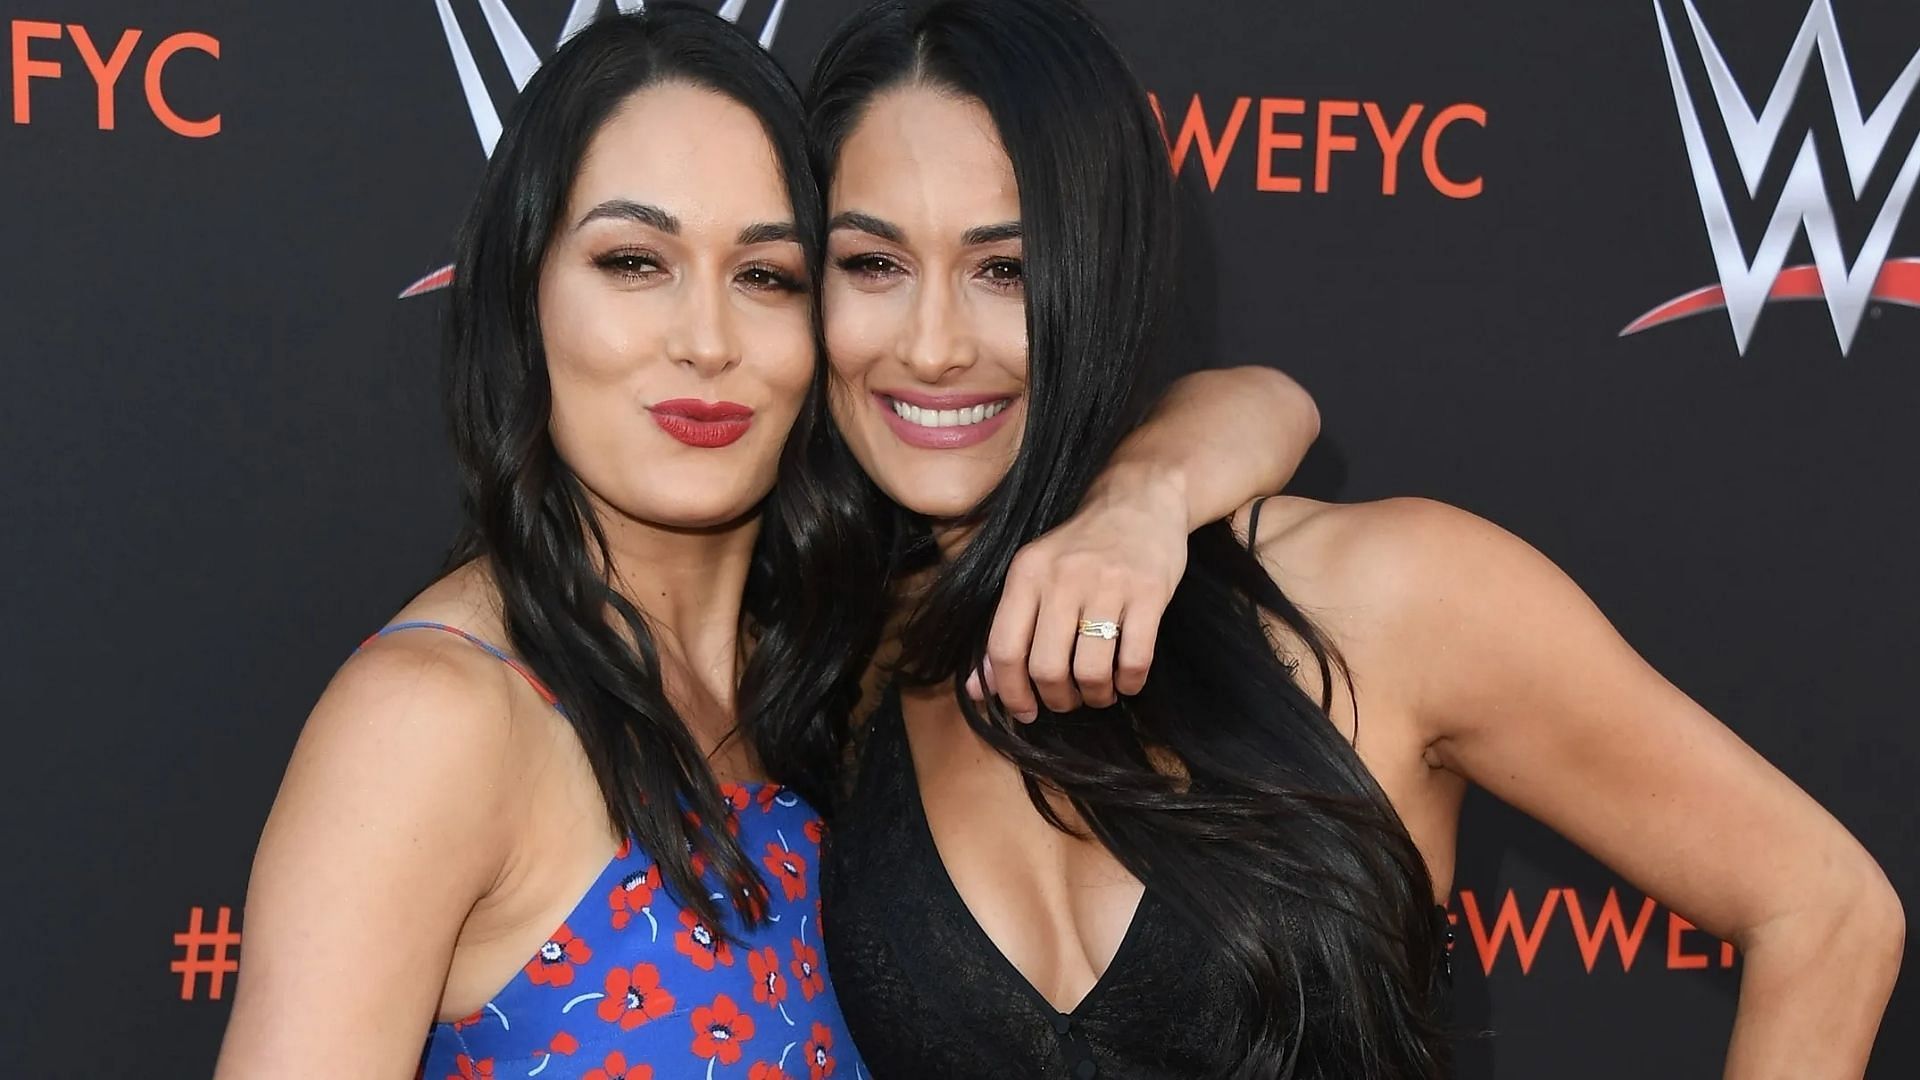 The Bella Twins are WWE Hall of Famers.